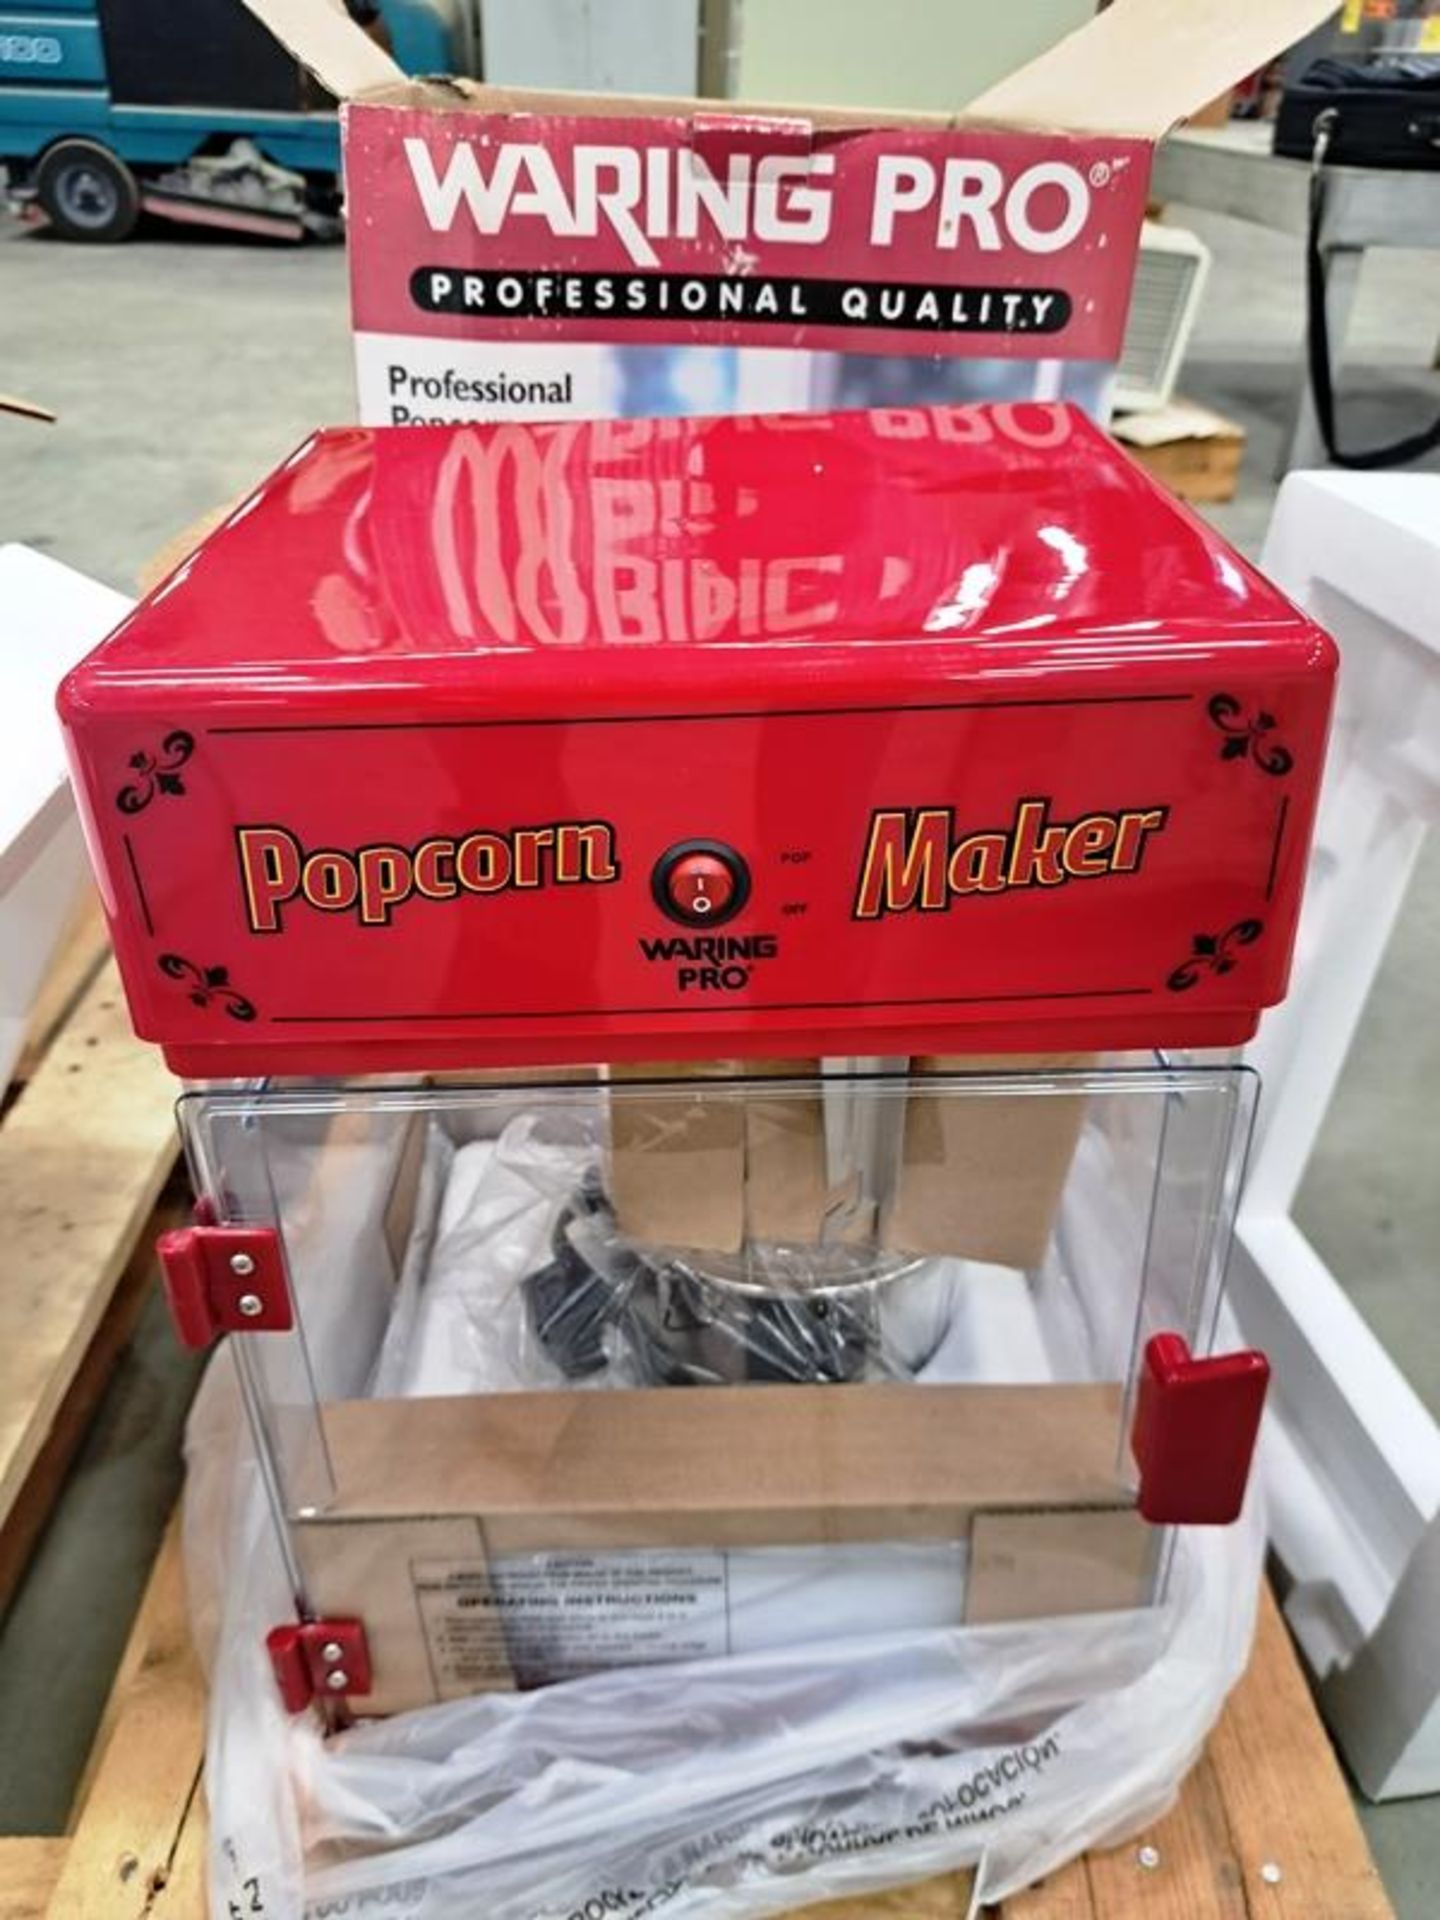 Waring Pro Professional Popcorn Maker, unused, in box (Required Loading Fee: $25.00) NO HAND - Image 3 of 3